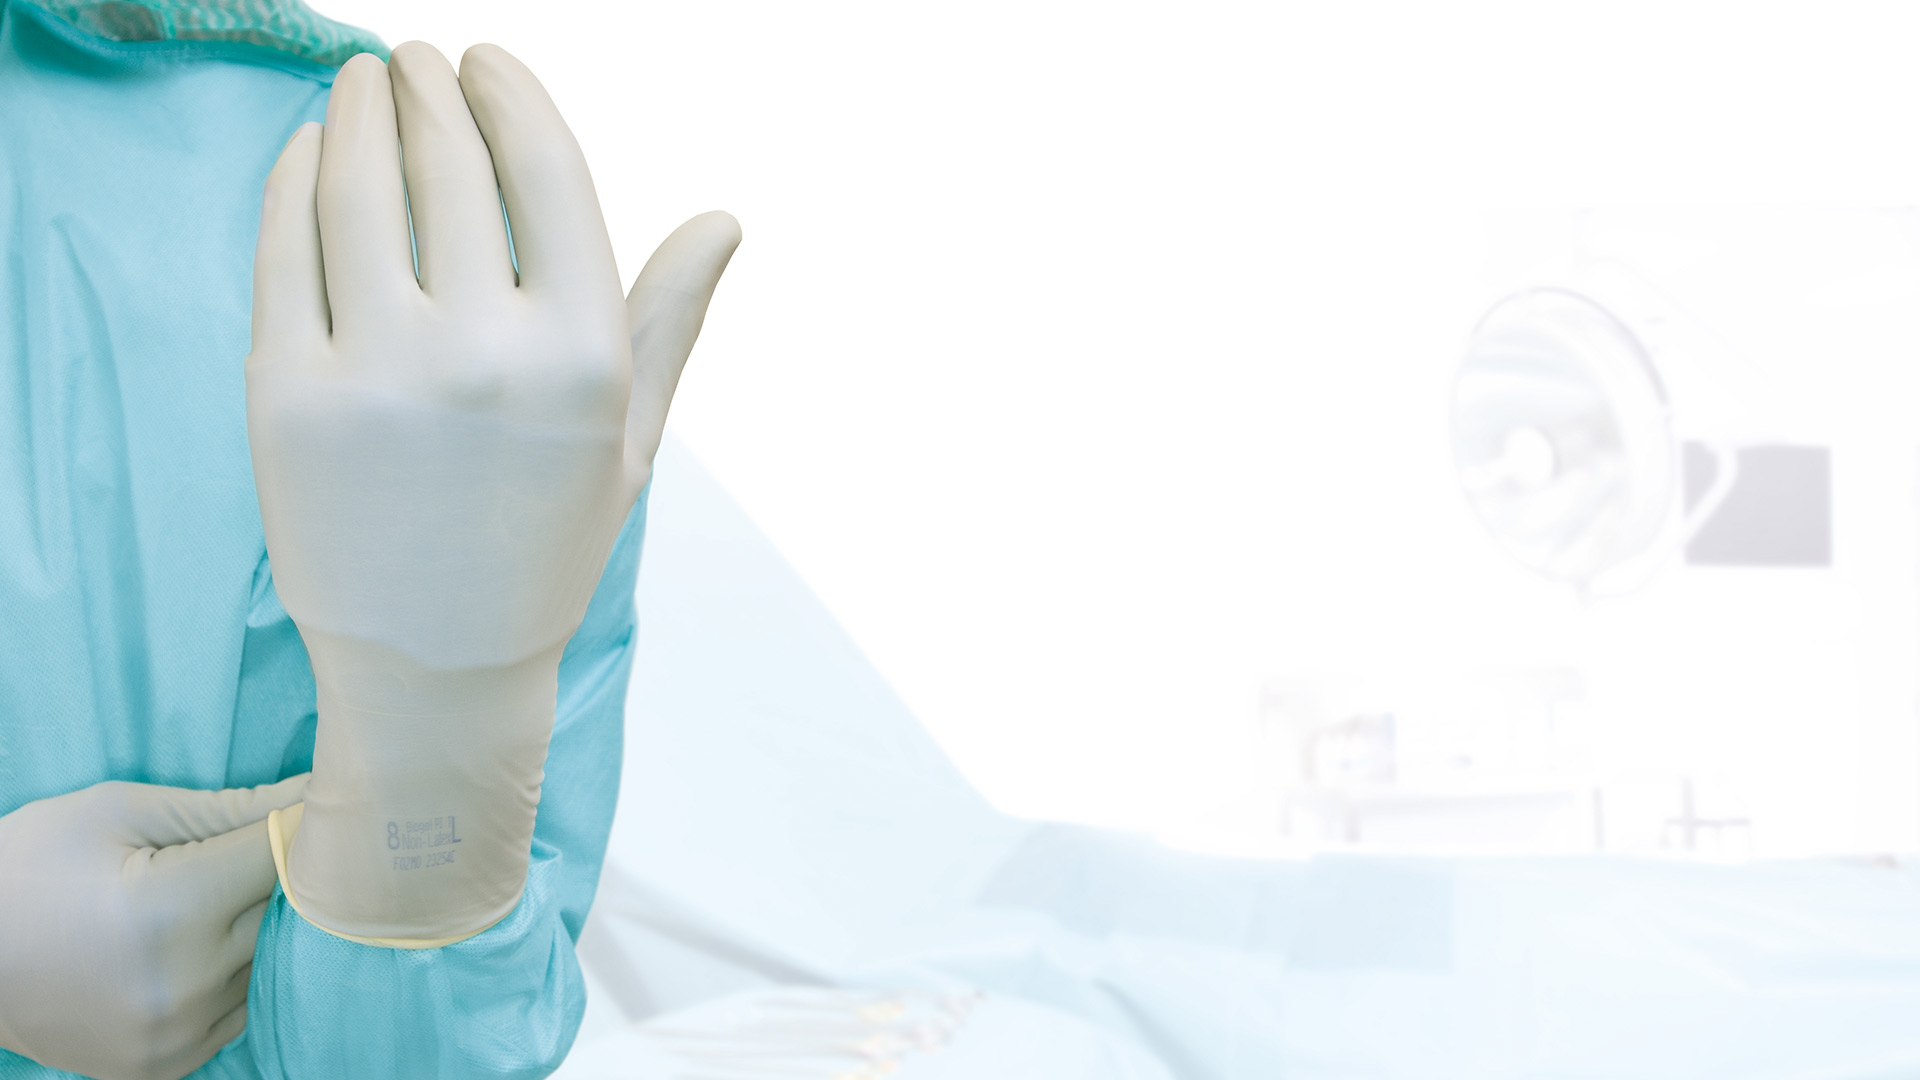 Healthcare professional wearing Biogel synthetic gloves